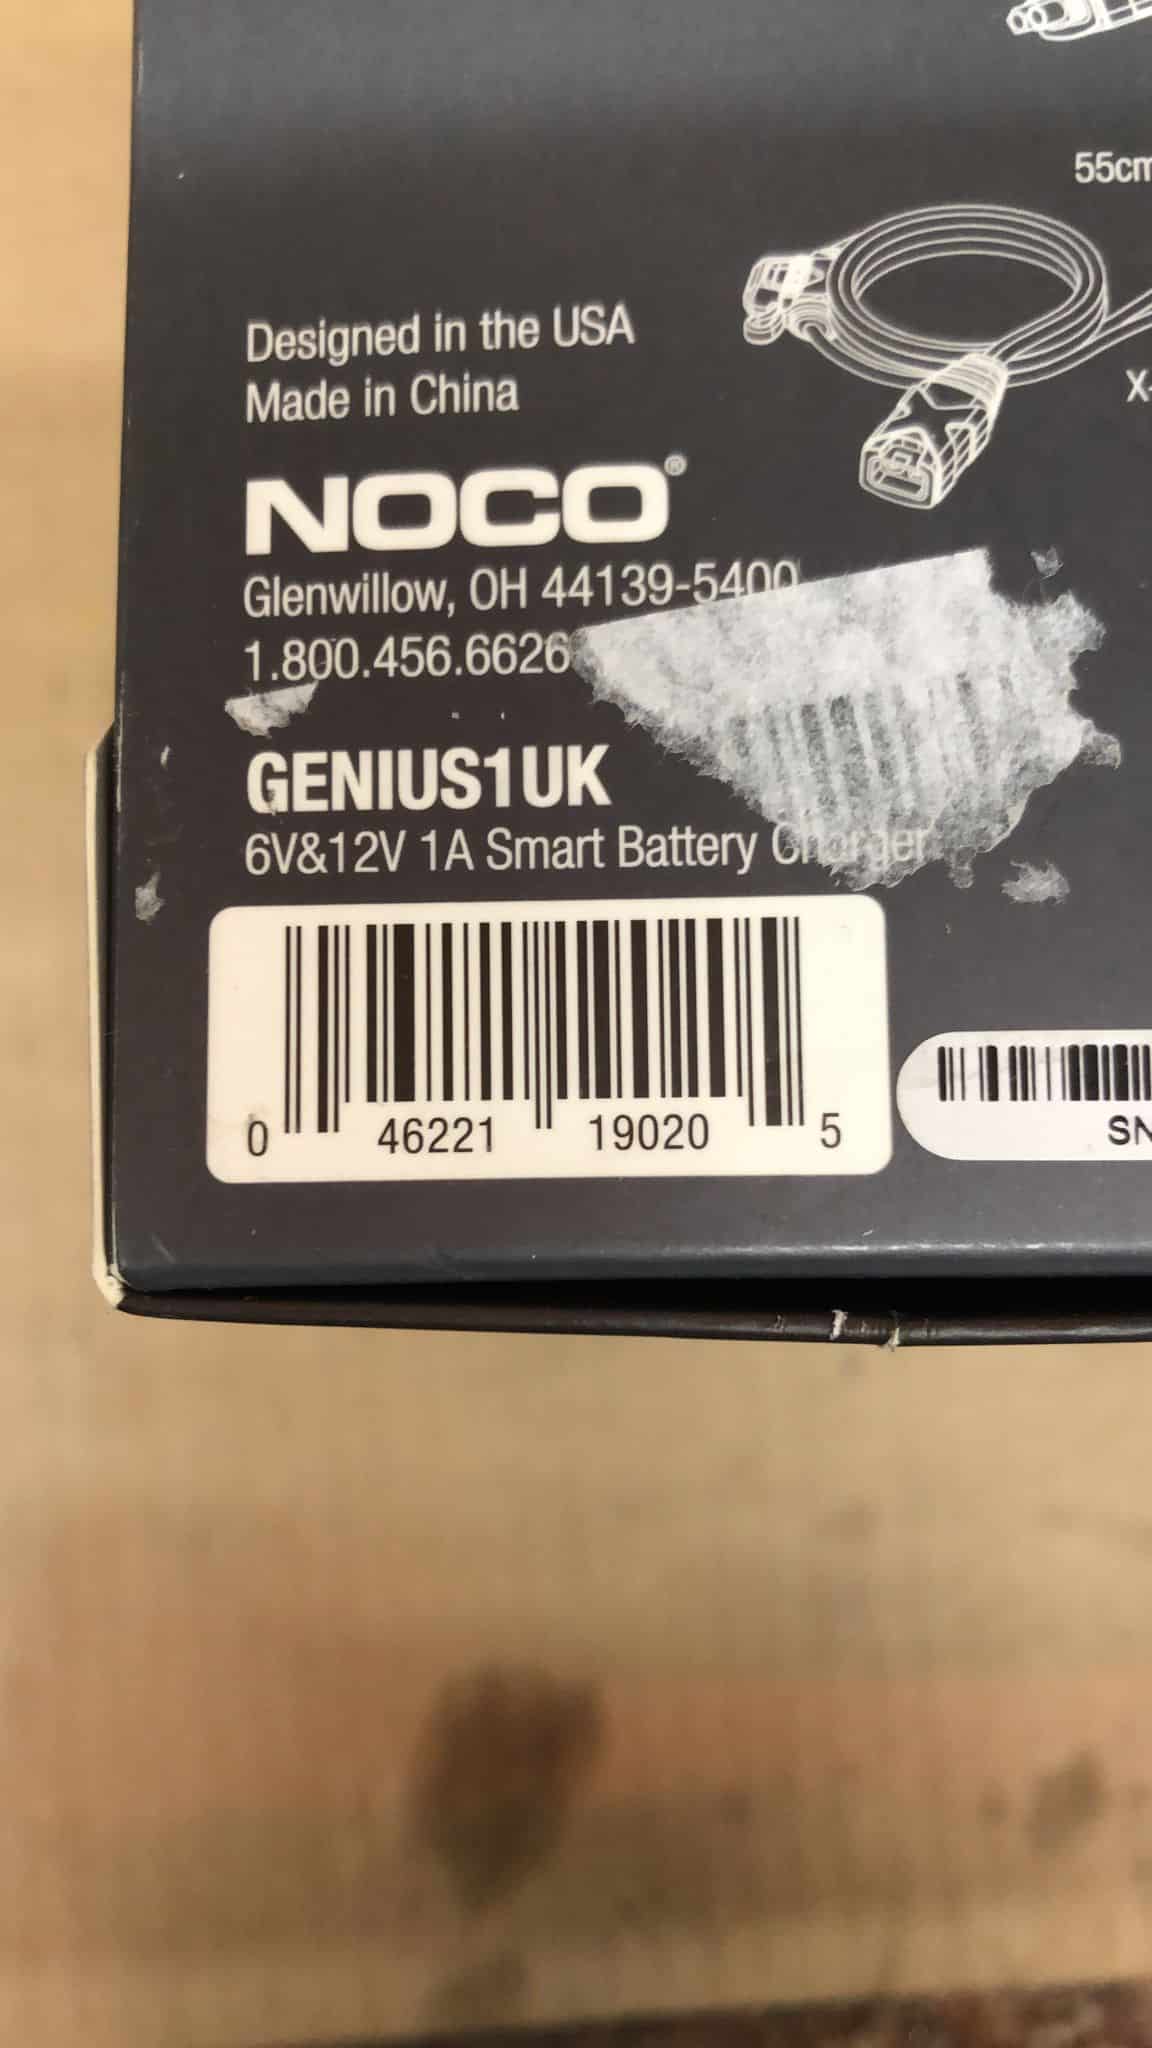 NOCO GENIUS1UK, 1A Car Battery Charger, 6V and 12V Portable Smart Charger 0205